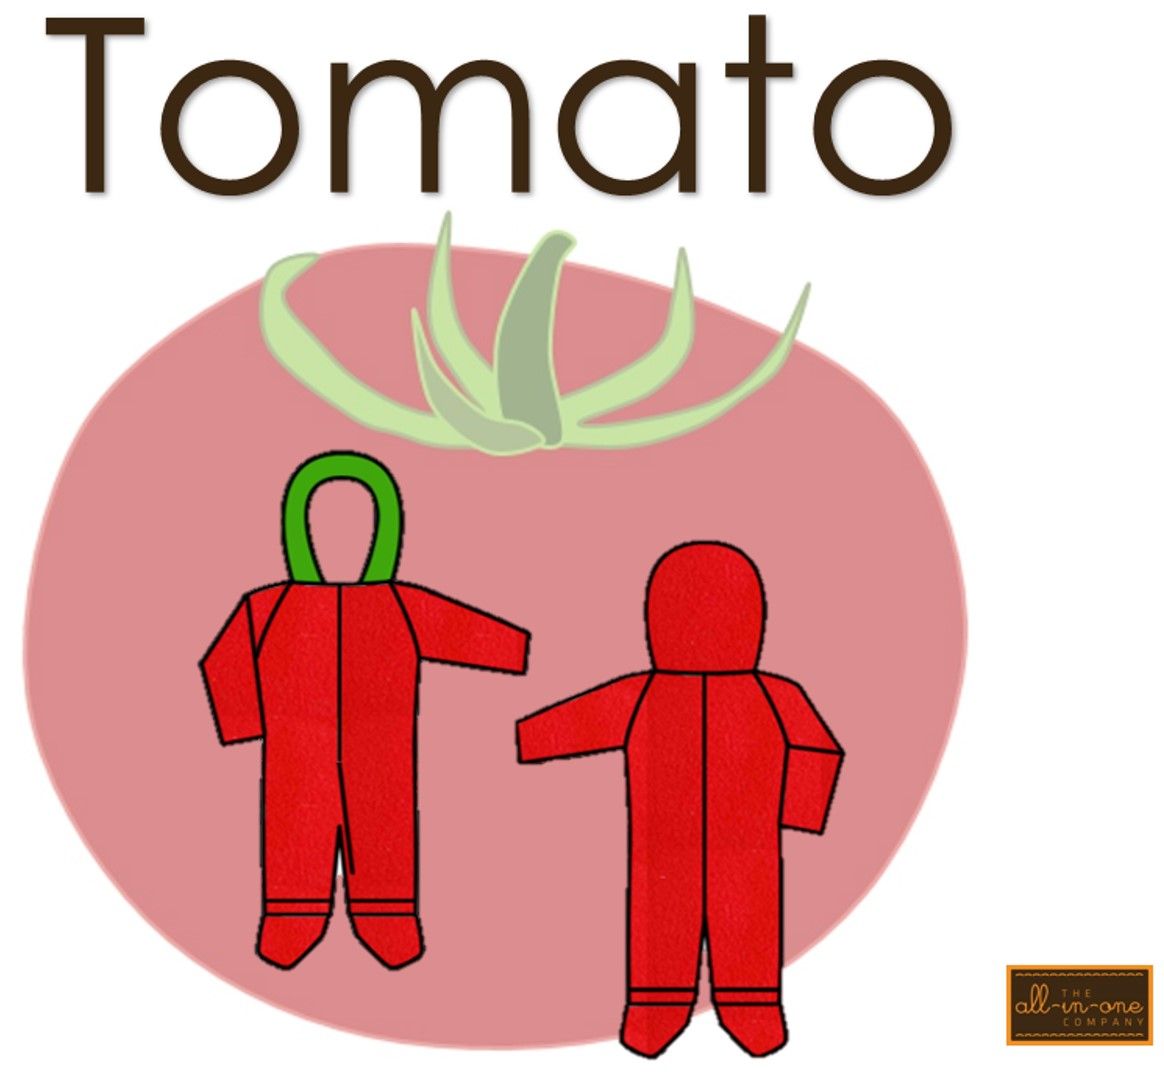 Tomato Onesie by The All-in-One Company